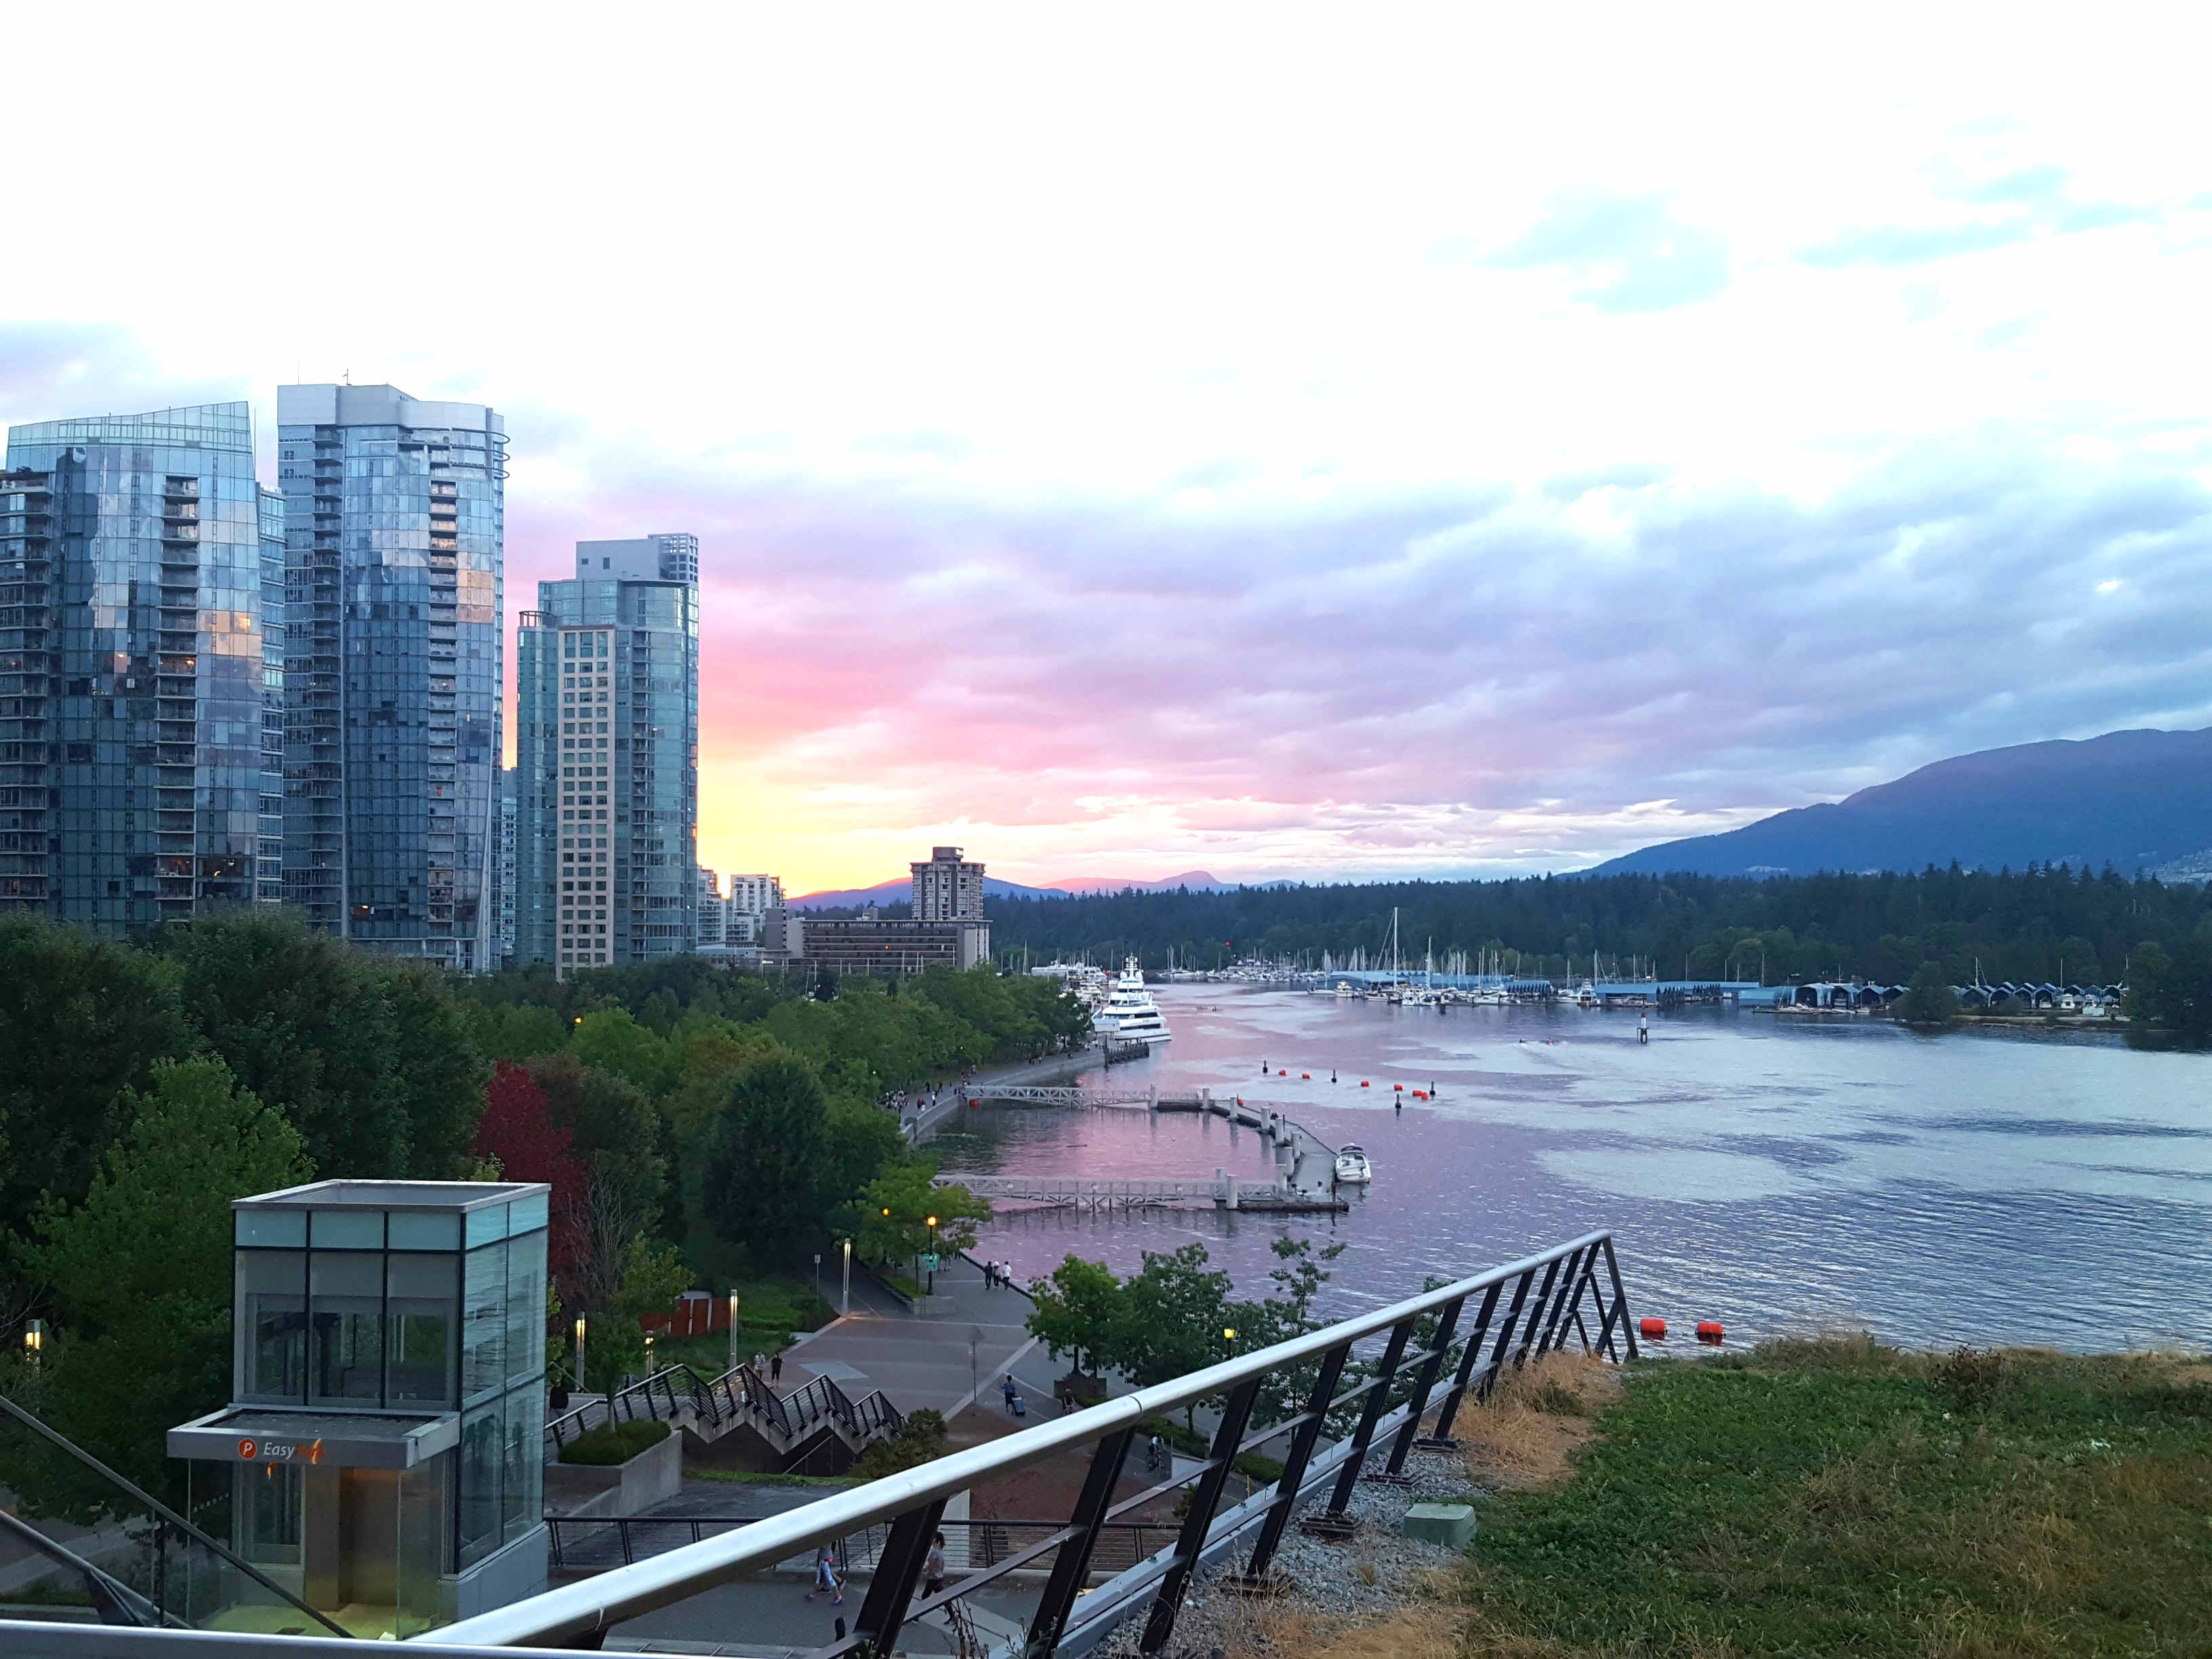 Vancouver's coal harbour at sunset